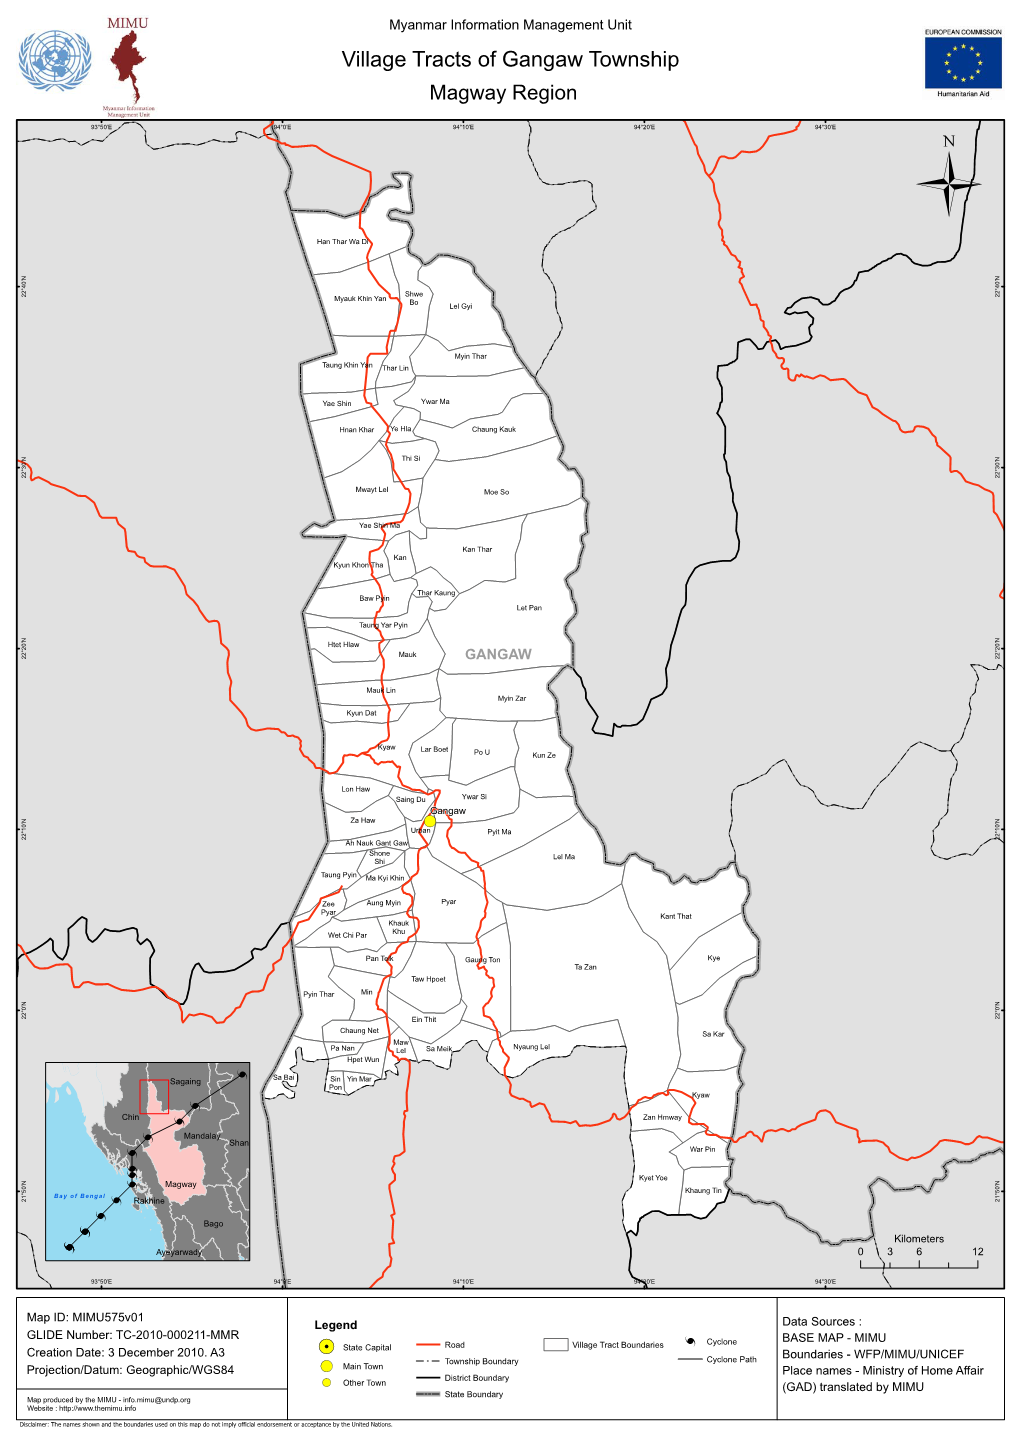 Village Tracts of Gangaw Township Magway Region